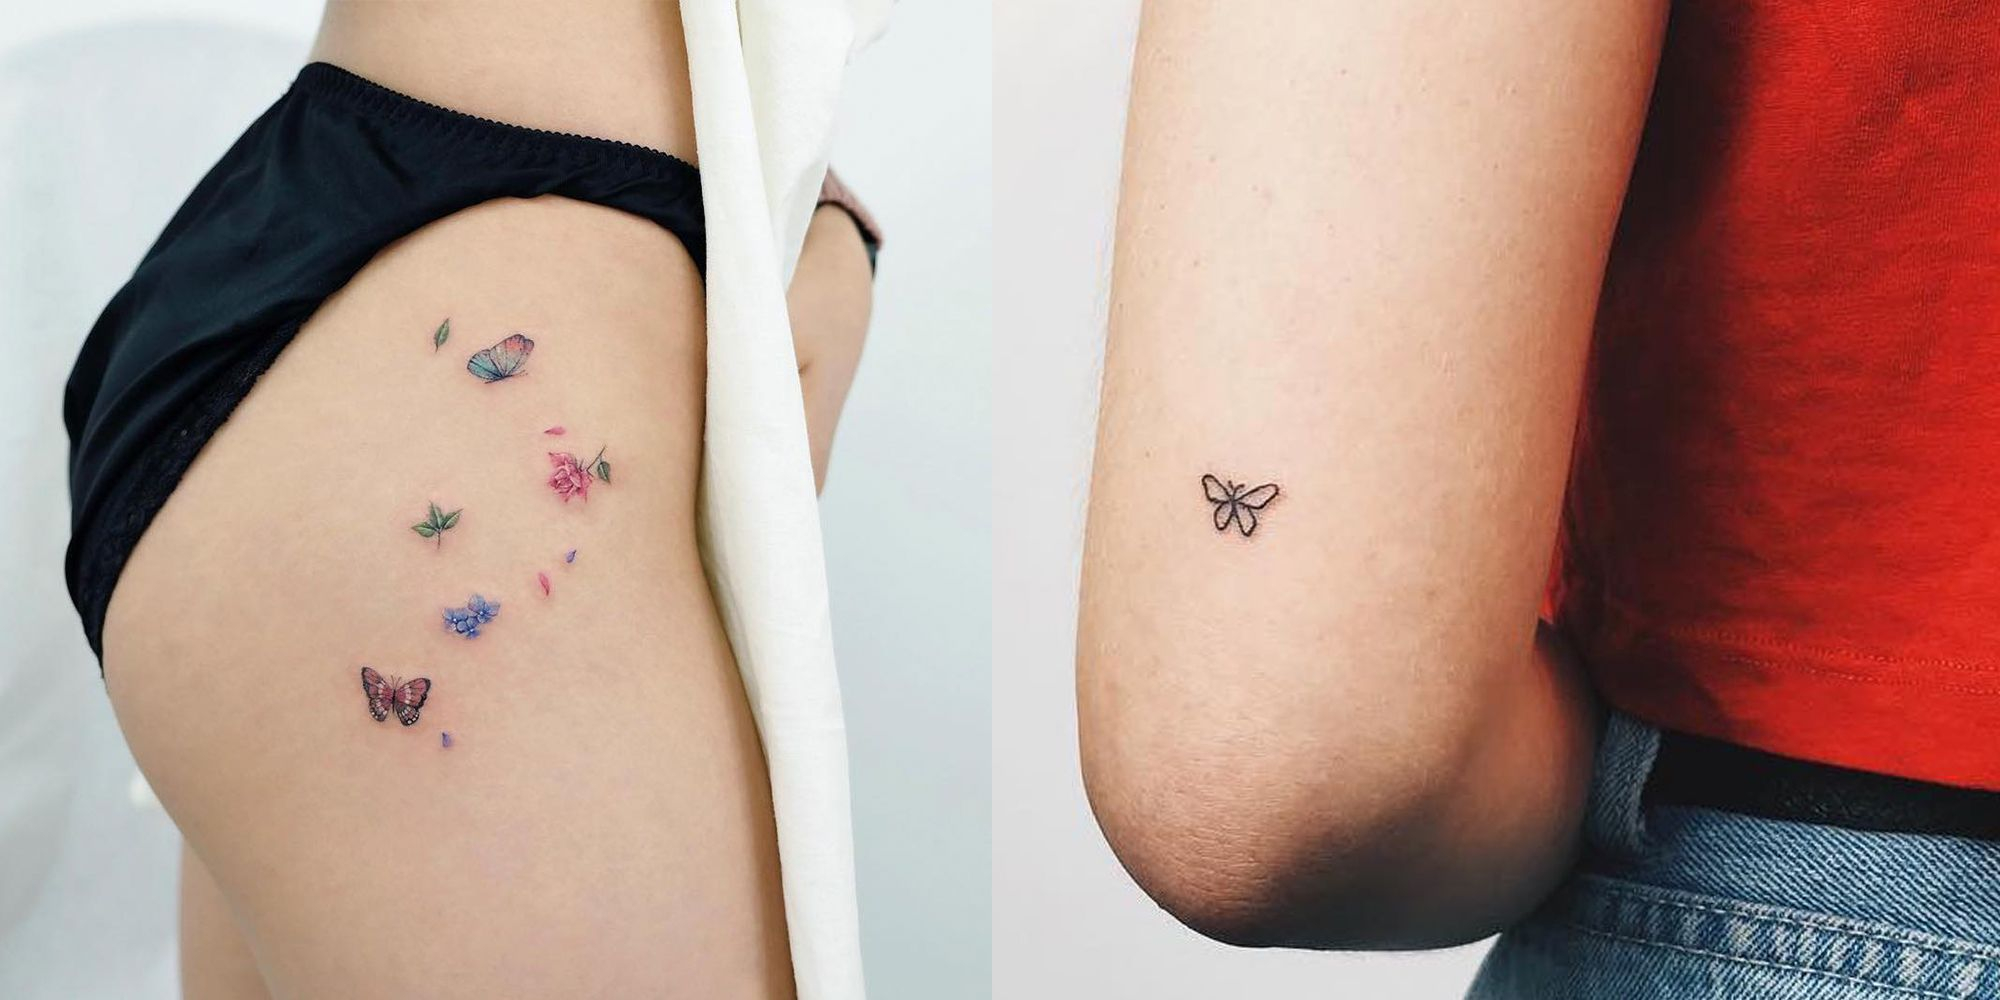 17 Butterfly Tattoo Ideas That Are Pretty Not Tacky Pictures Of within dimensions 2000 X 1000